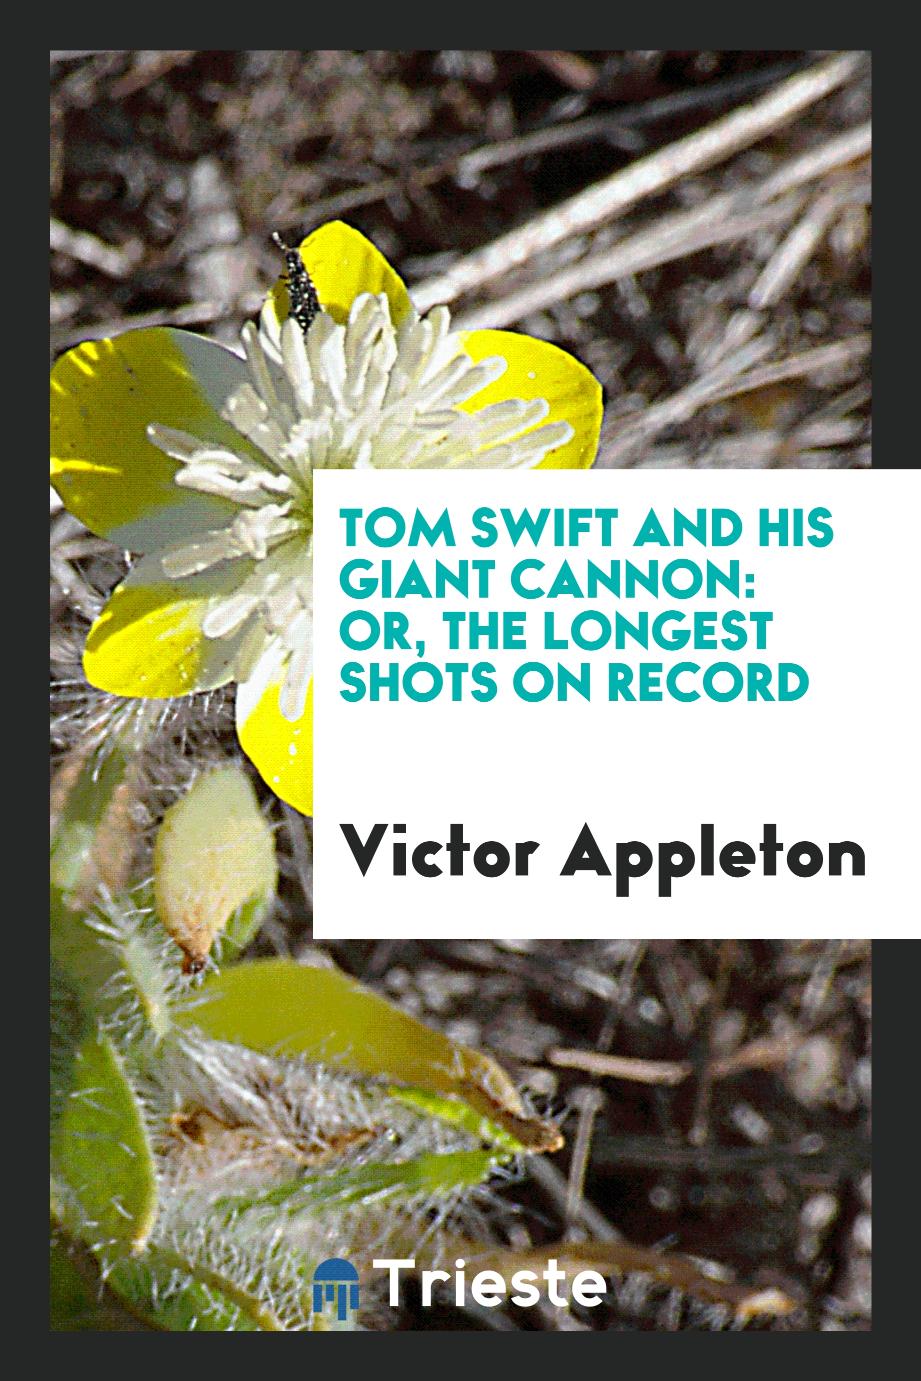 Tom Swift and his giant cannon: or, The longest shots on record